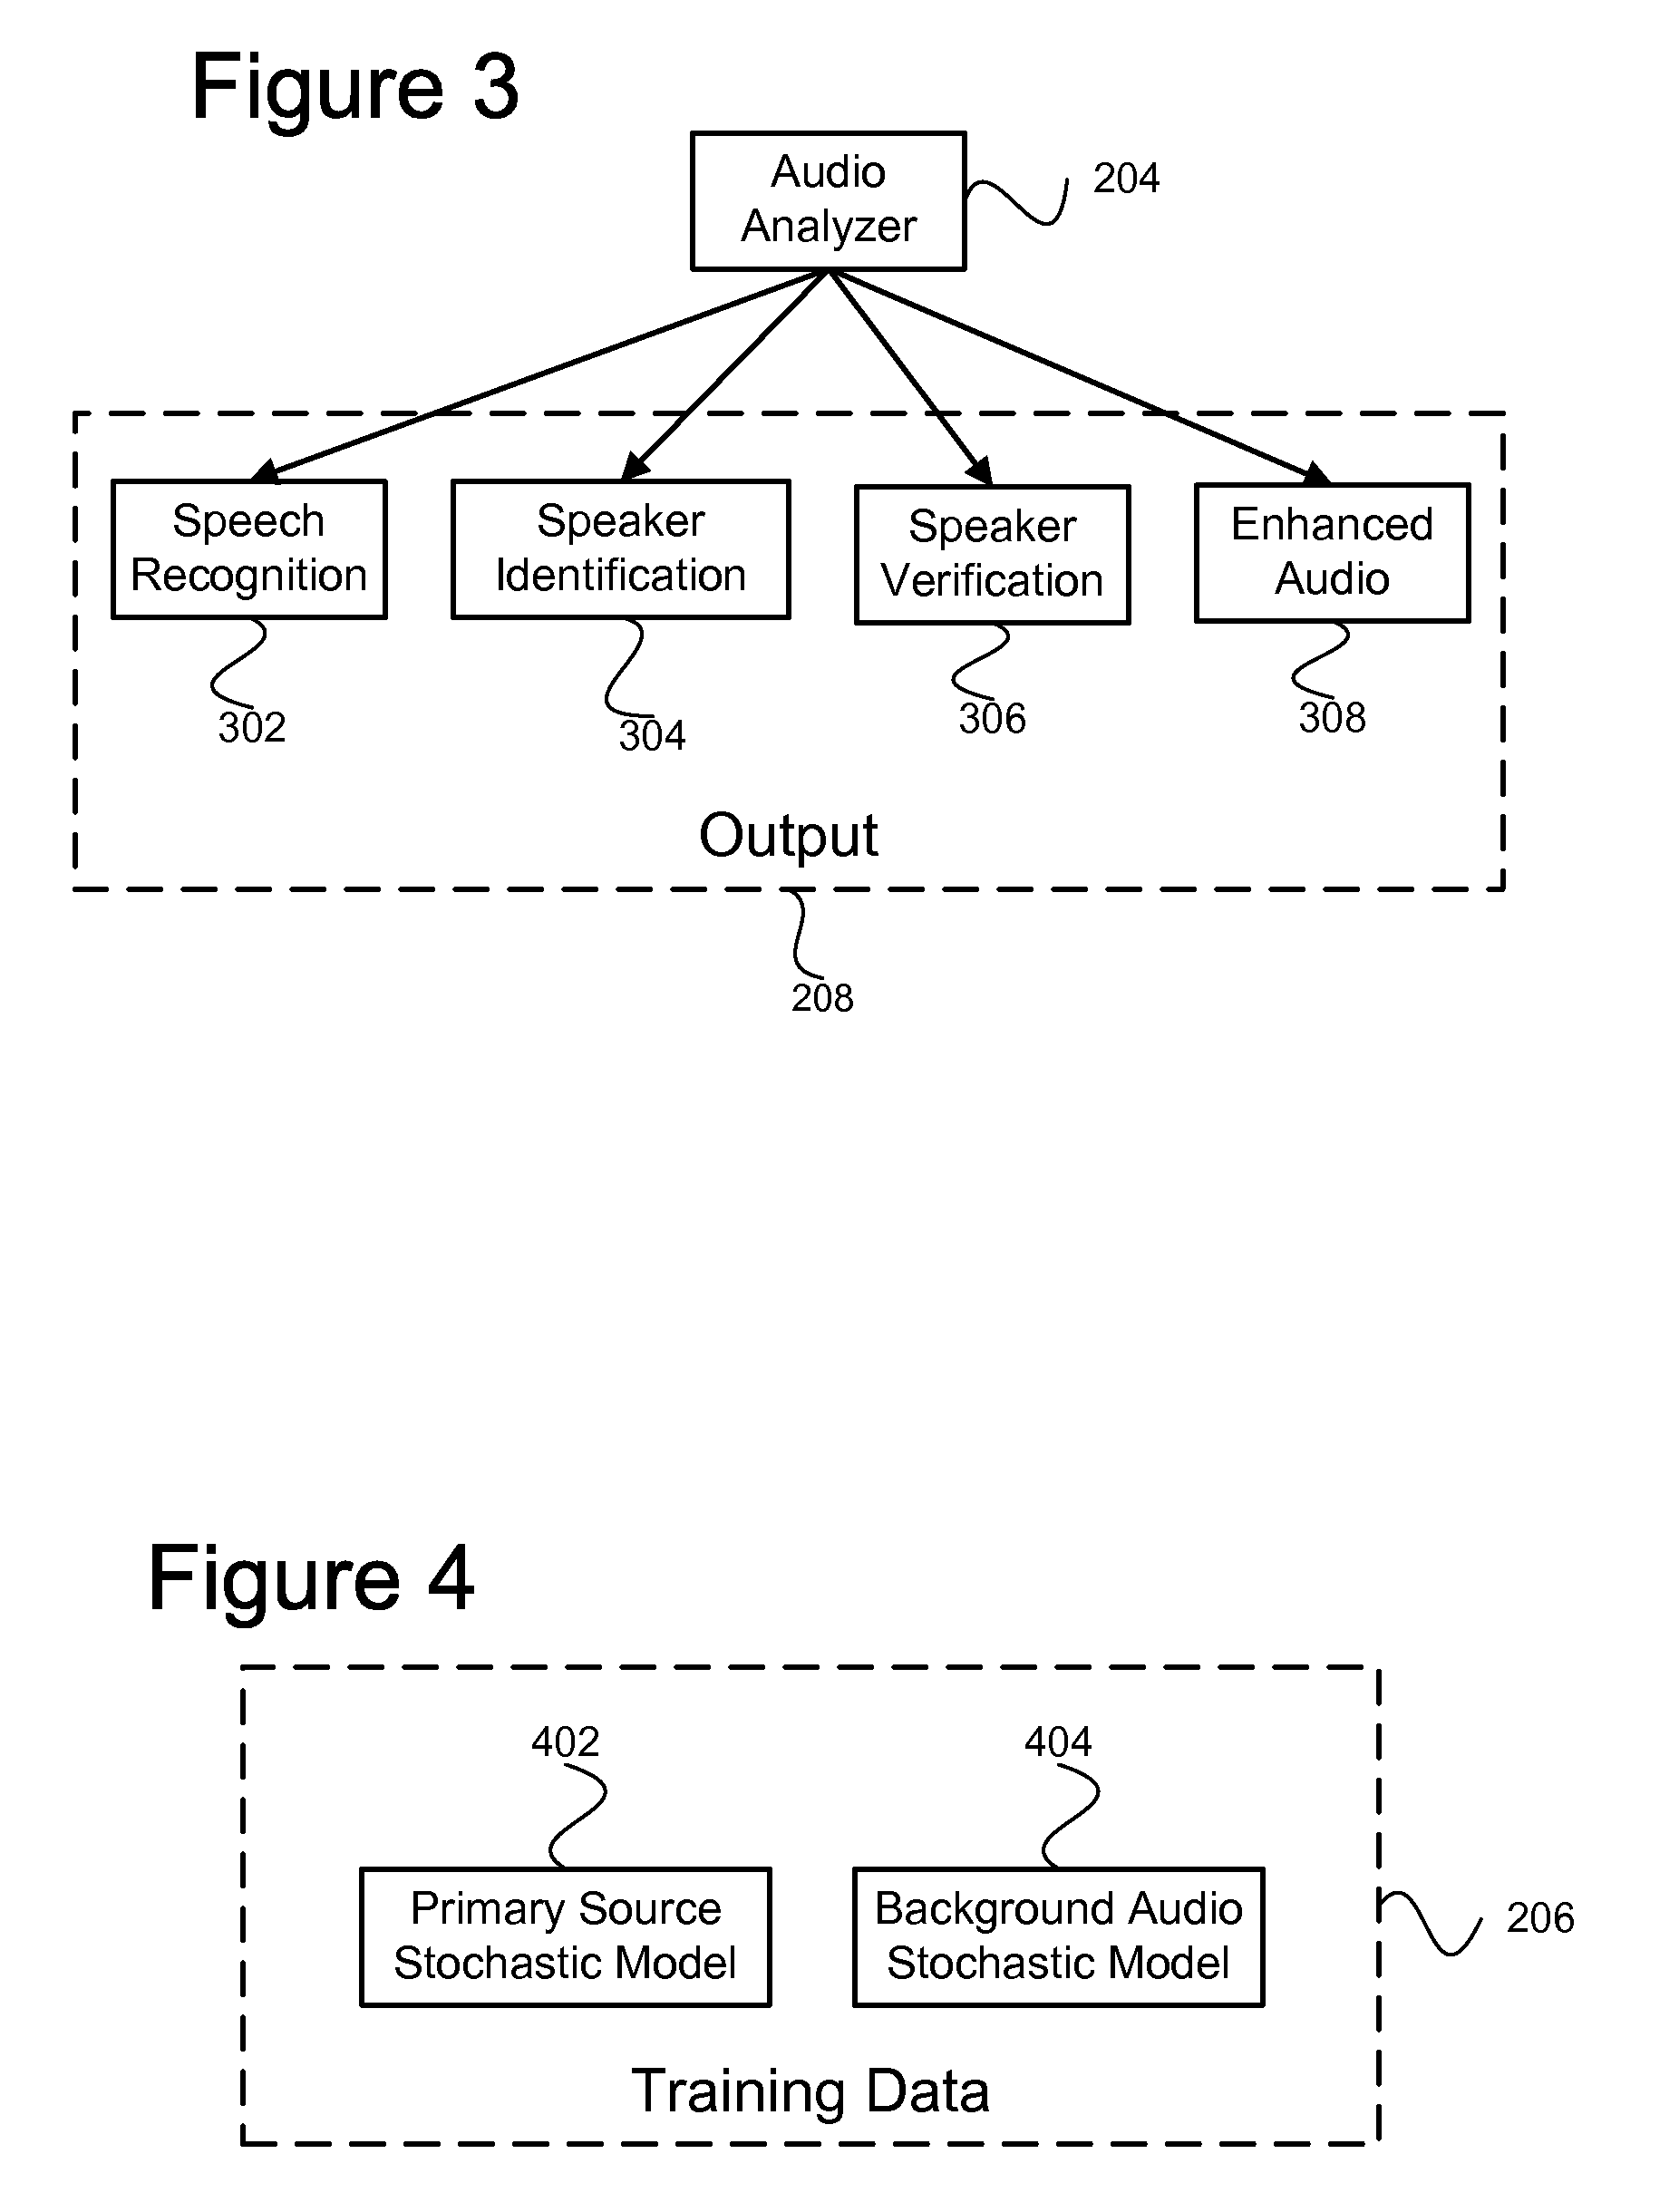 System for distinguishing desired audio signals from noise